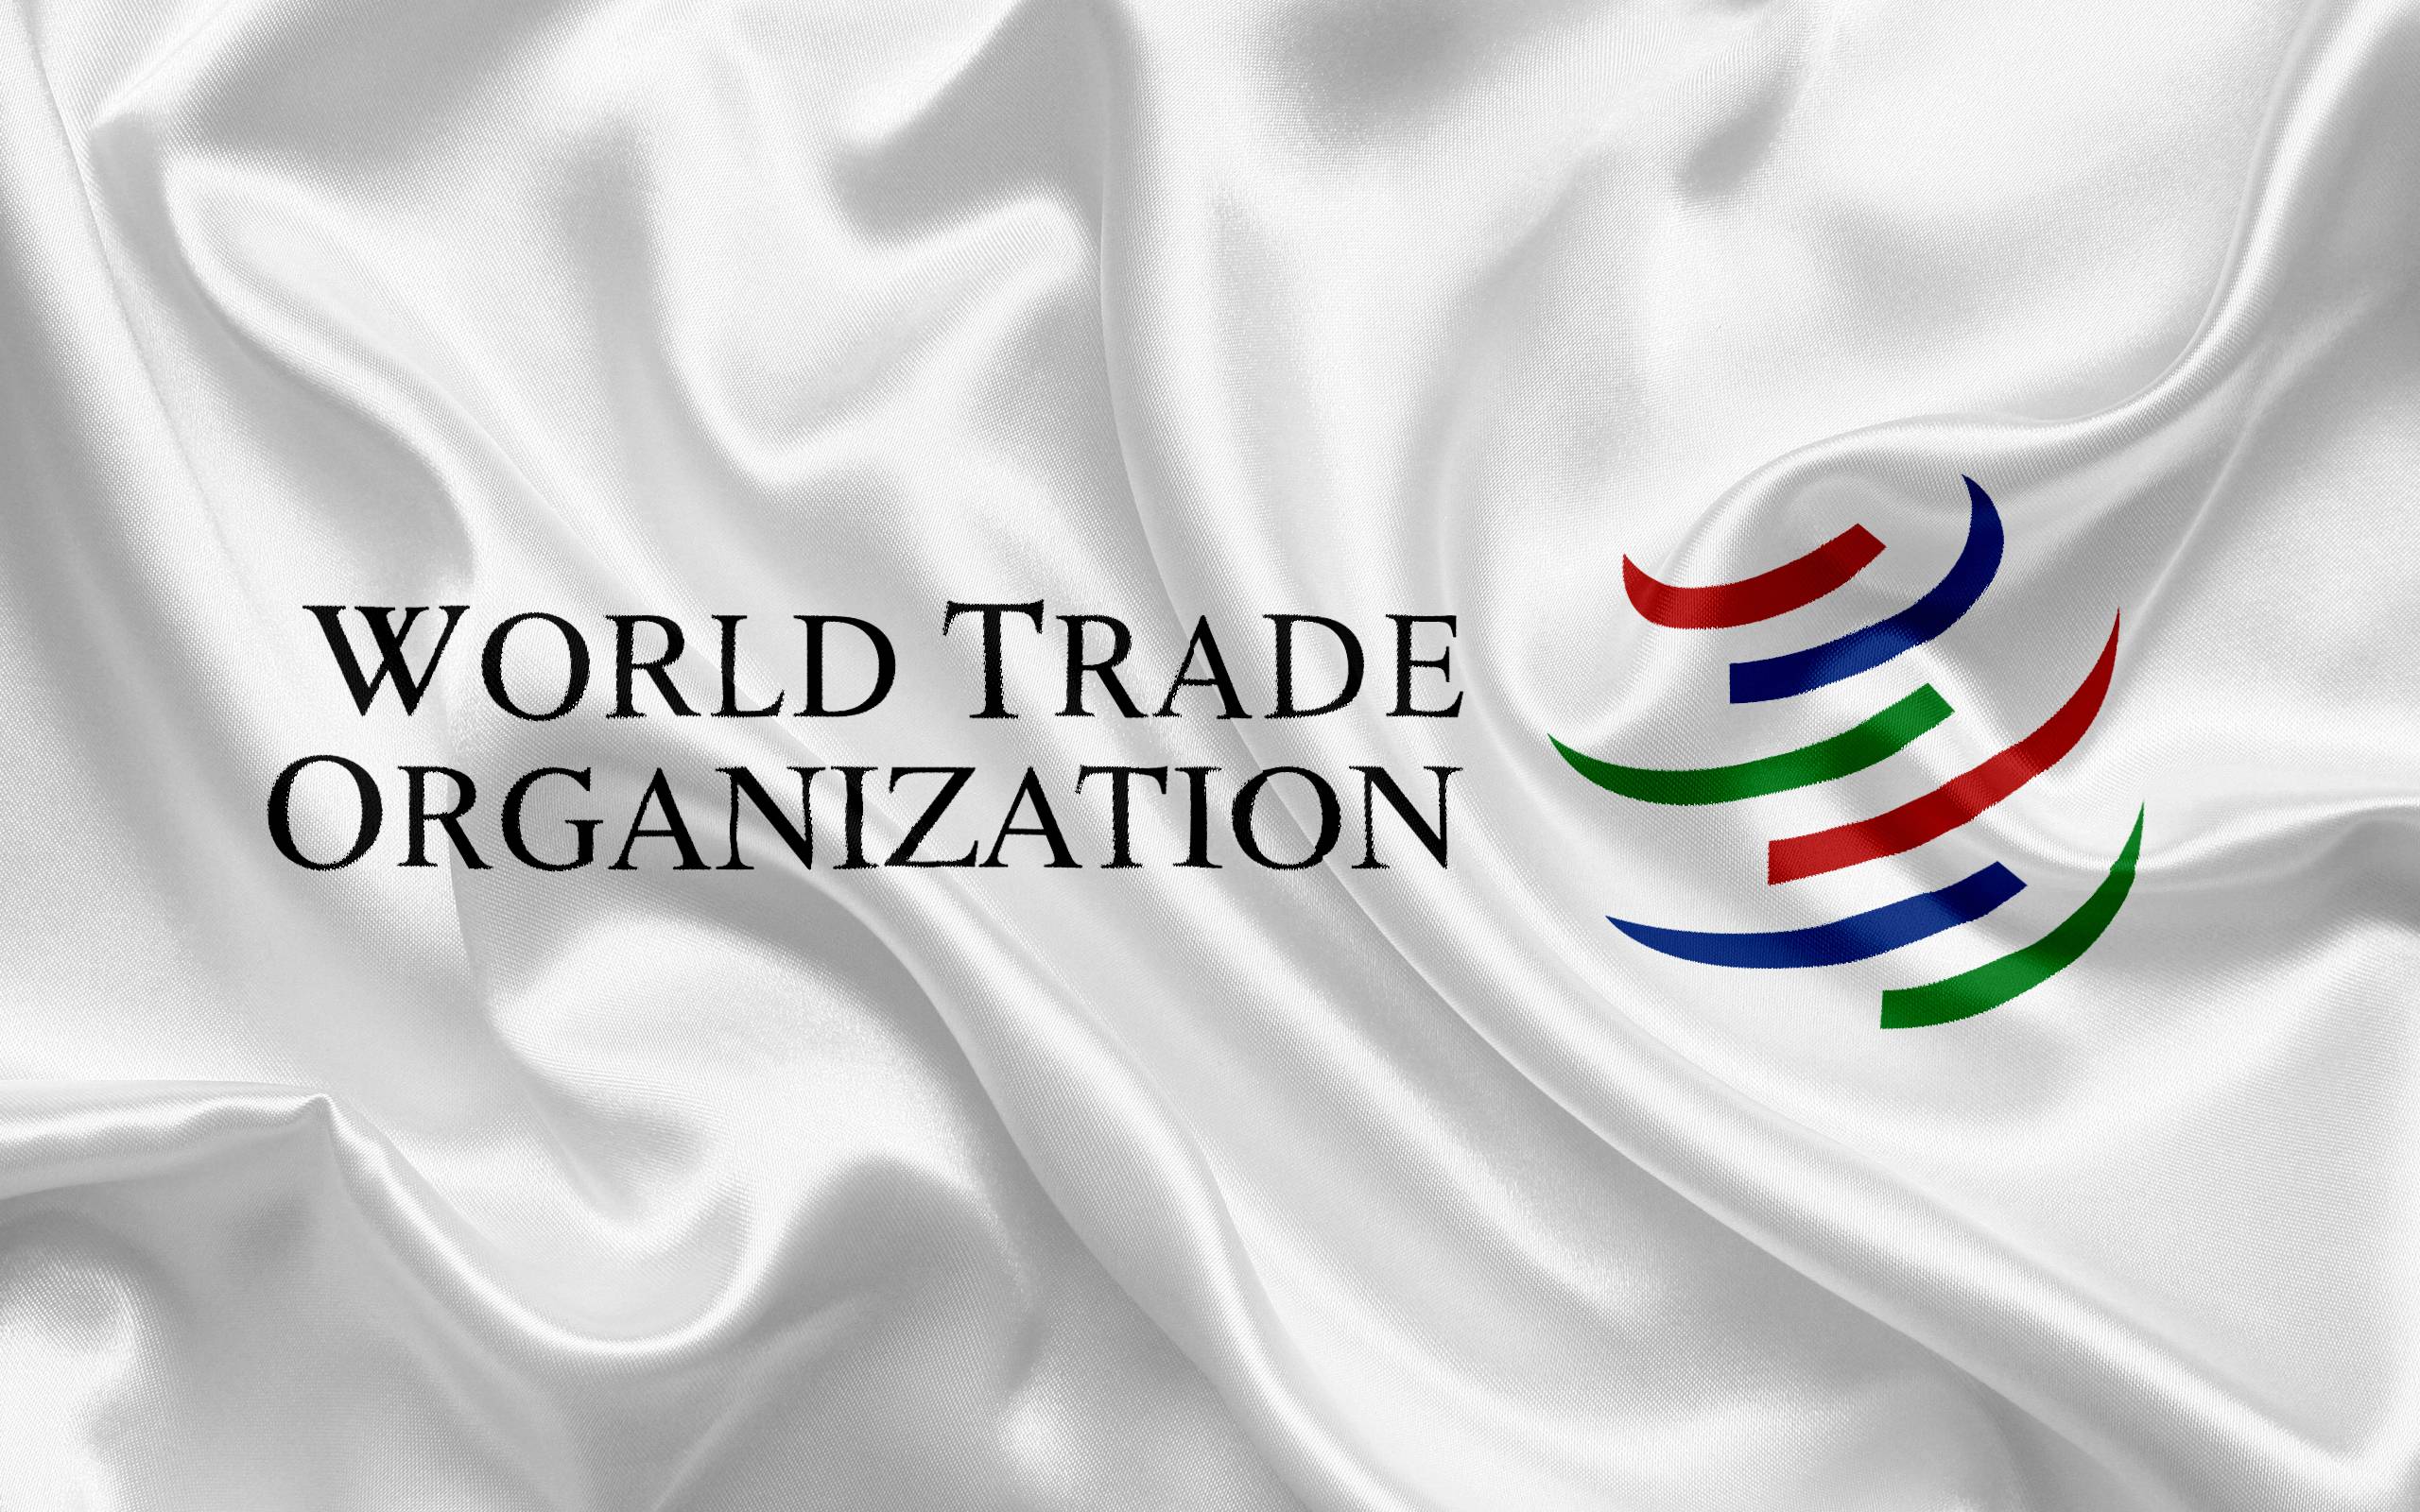 WTO Logo - APEC countries agreed to help improve World Trade Organization